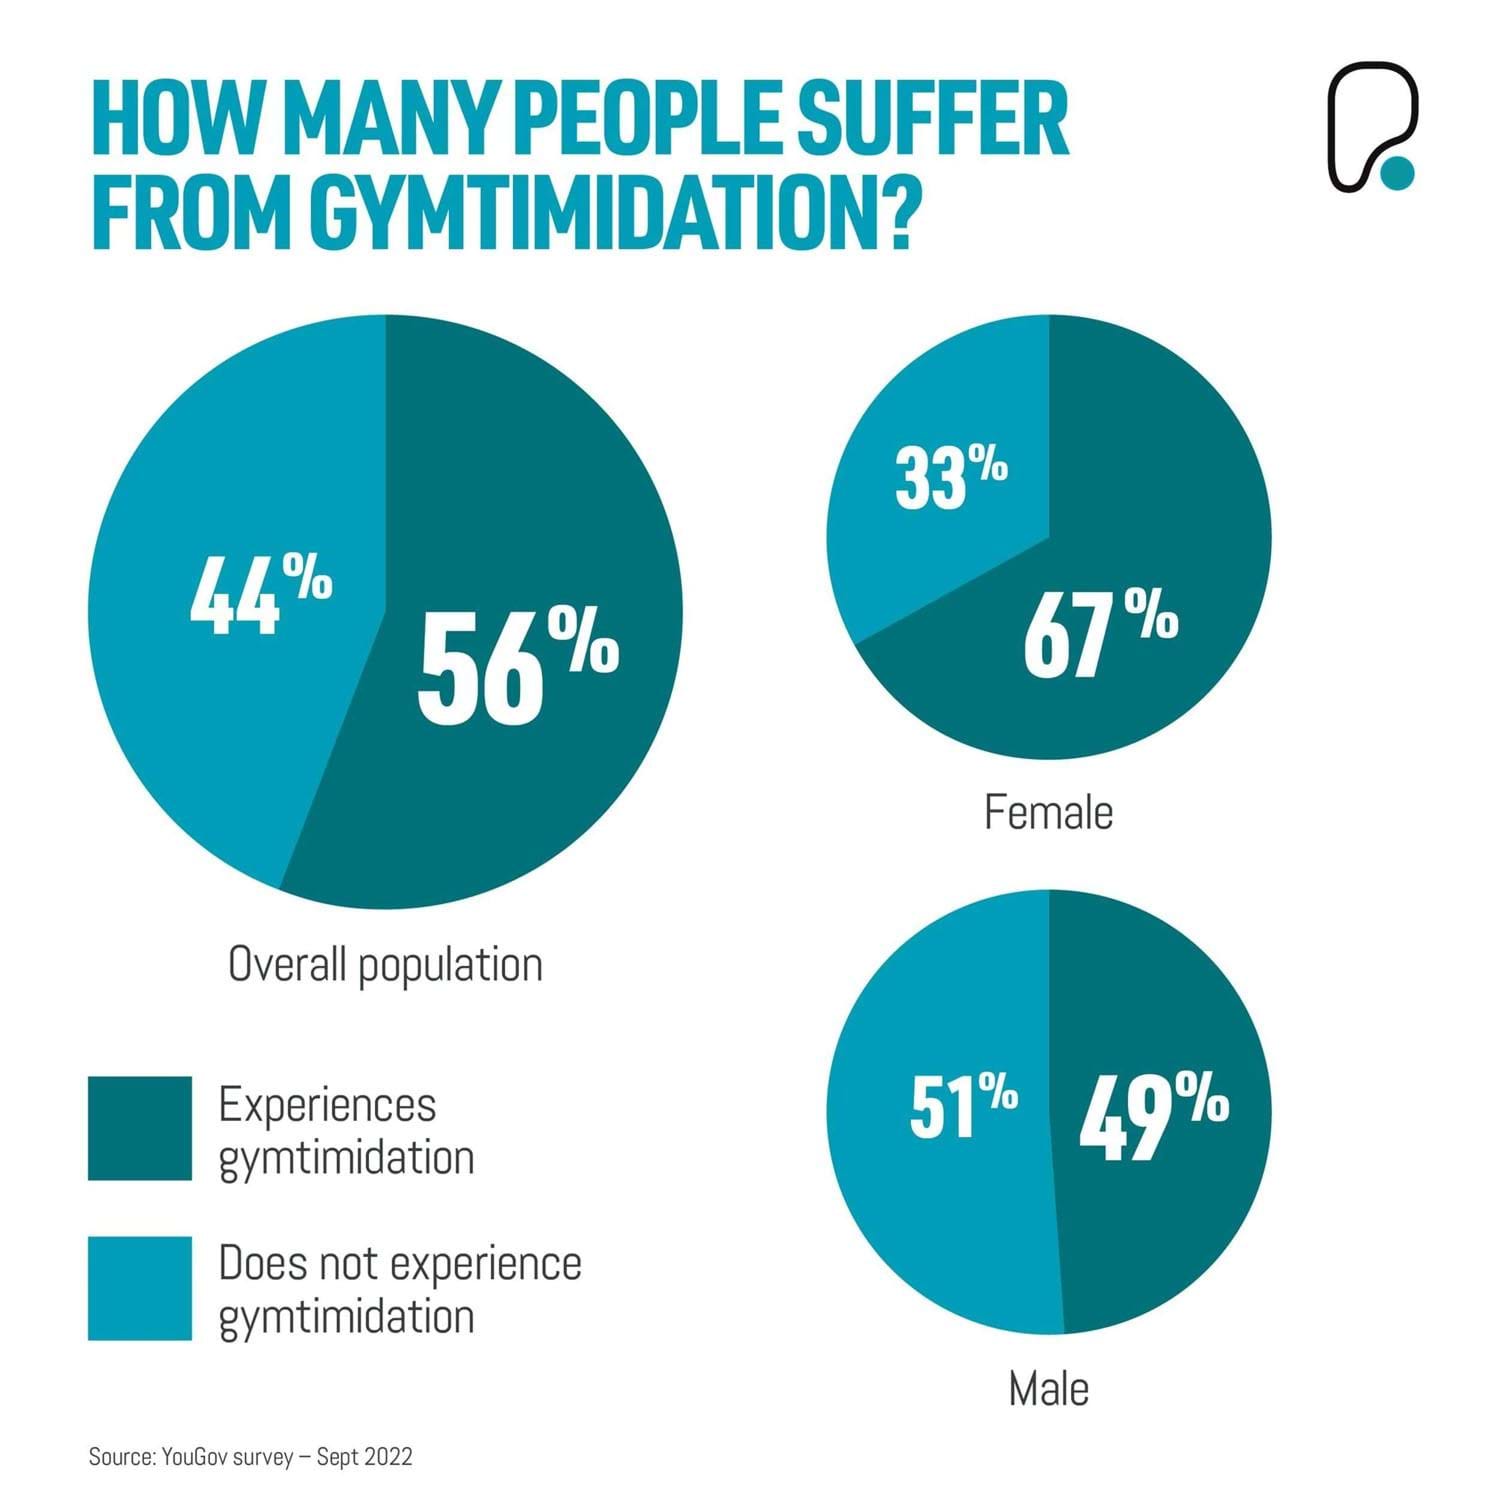 How many people suffer from gymtimidation?